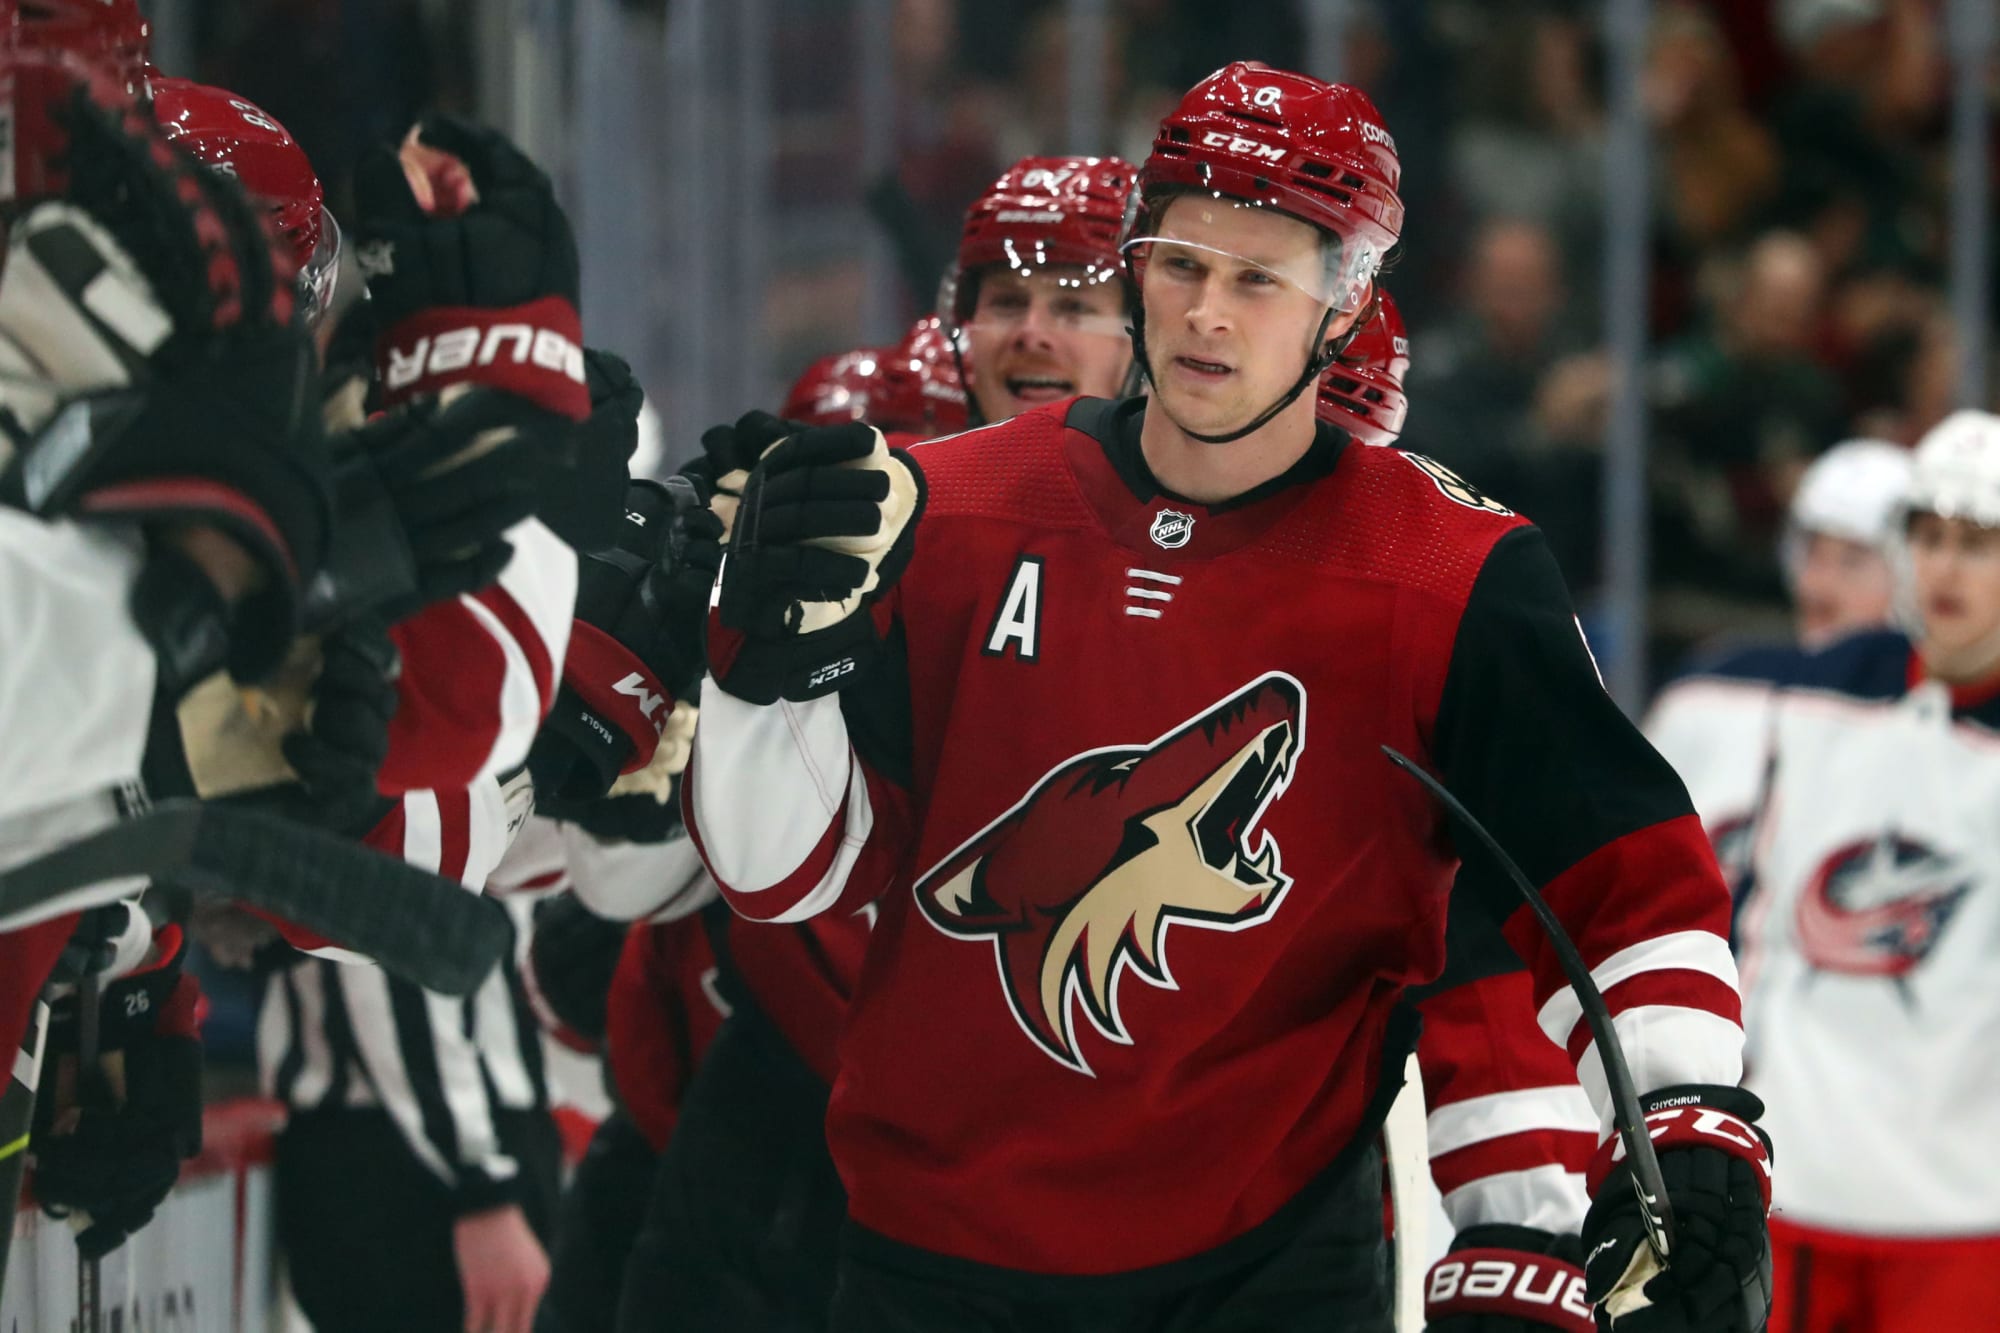 Why the Coyotes Better Take Advantage of Chychrun's High Value